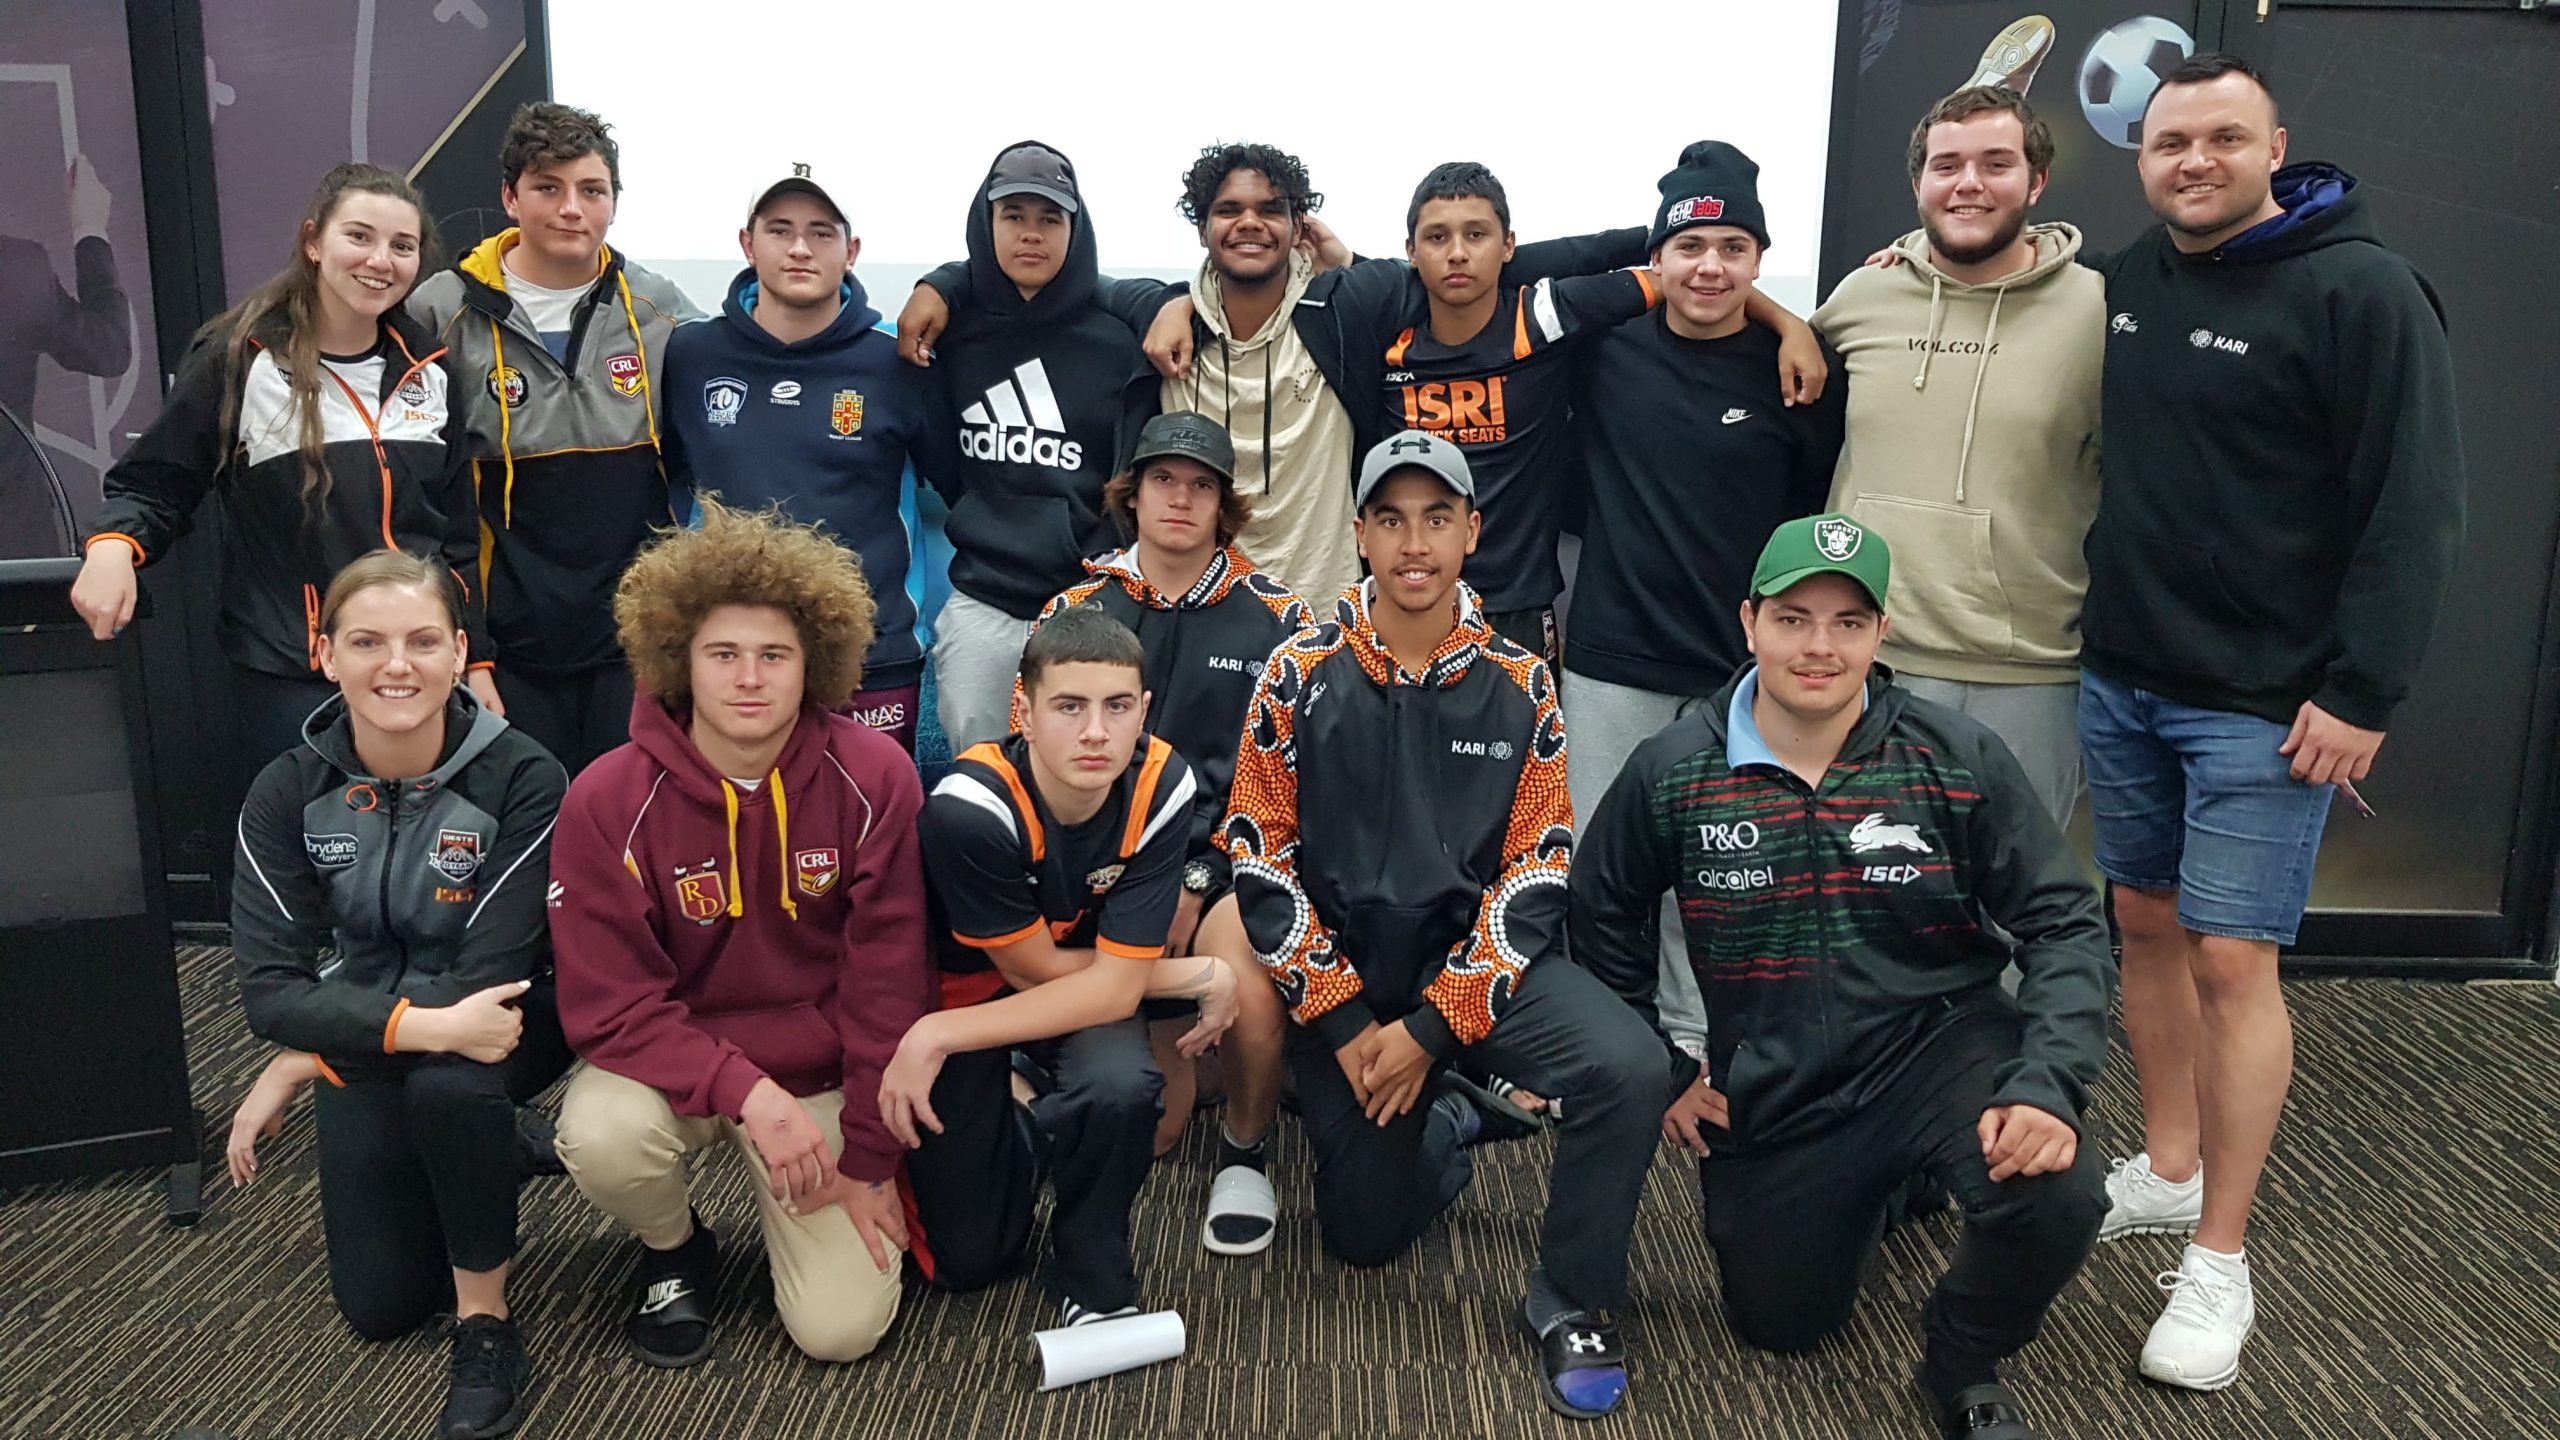 Wests Tigers Camp, 2019, Camp, Football, Indigenous, KARI, Pathways Camp, Wests Tigers Elite Pathways Camp, Partnership, Community, Youth, Indigenous Community, Participants, Leadership, Wests Tigers, NRL, Rugby League, Aboriginal Youth, Aboriginal Community